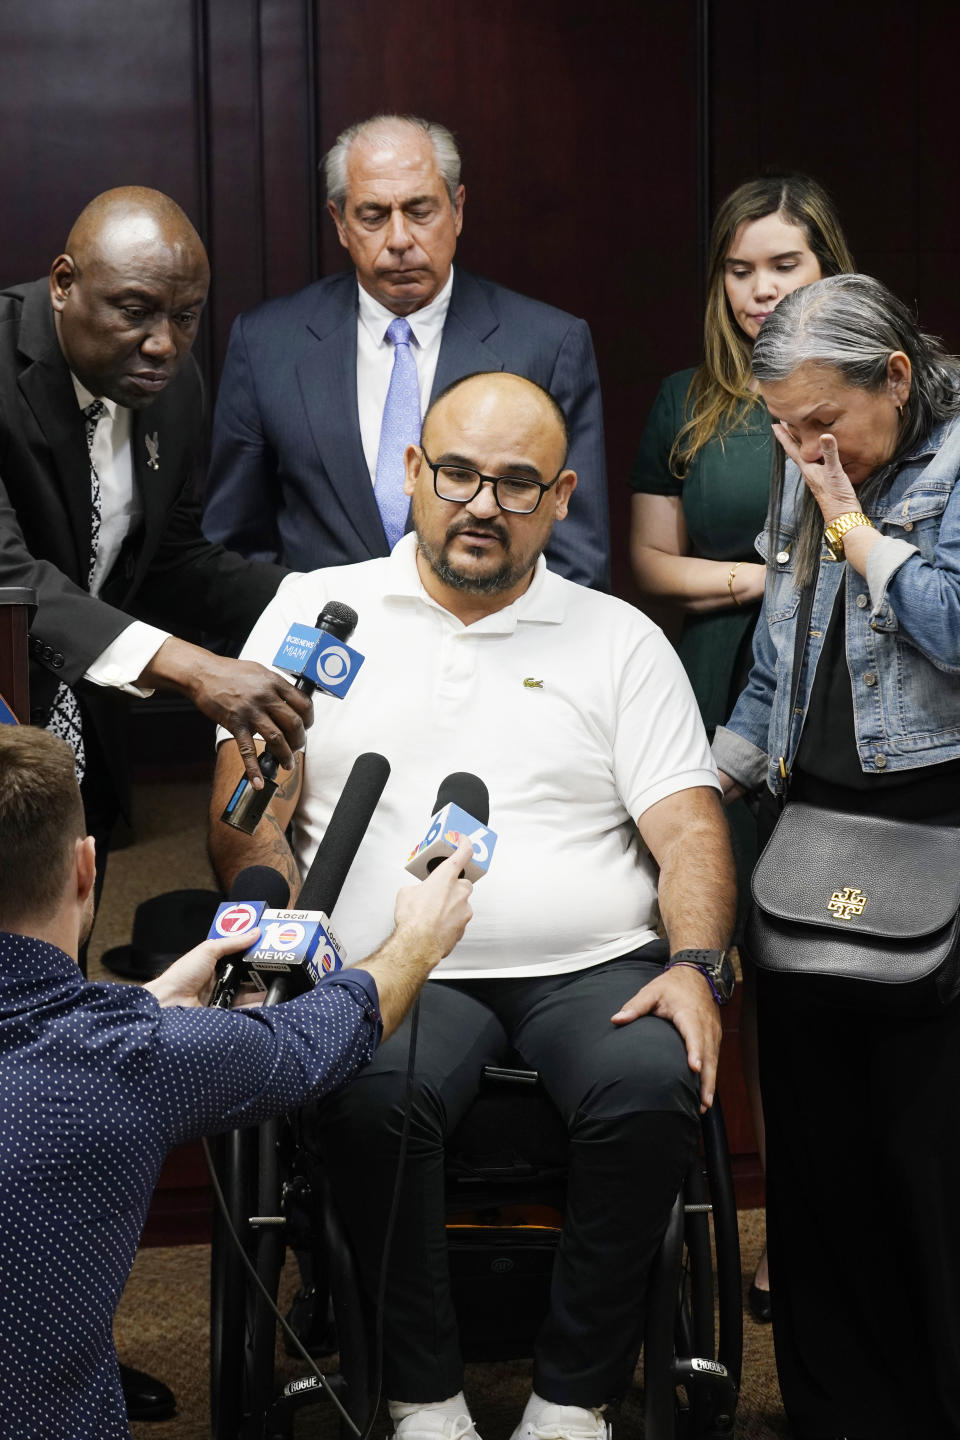 Michael Ortiz speaks at a news conference regarding a lawsuit against a police officer Wednesday, March 1, 2023, in Fort Lauderdale, Fla. Ortiz is suing after being paralyzed by a Hollywood, Fla., police officer who mistook his handgun for a taser and shot him in the back. Behind Ortiz are attorneys Ben Crump and Hunter Shkolnik. His mother Betty Ortiz is at right. (AP Photo/Marta Lavandier)